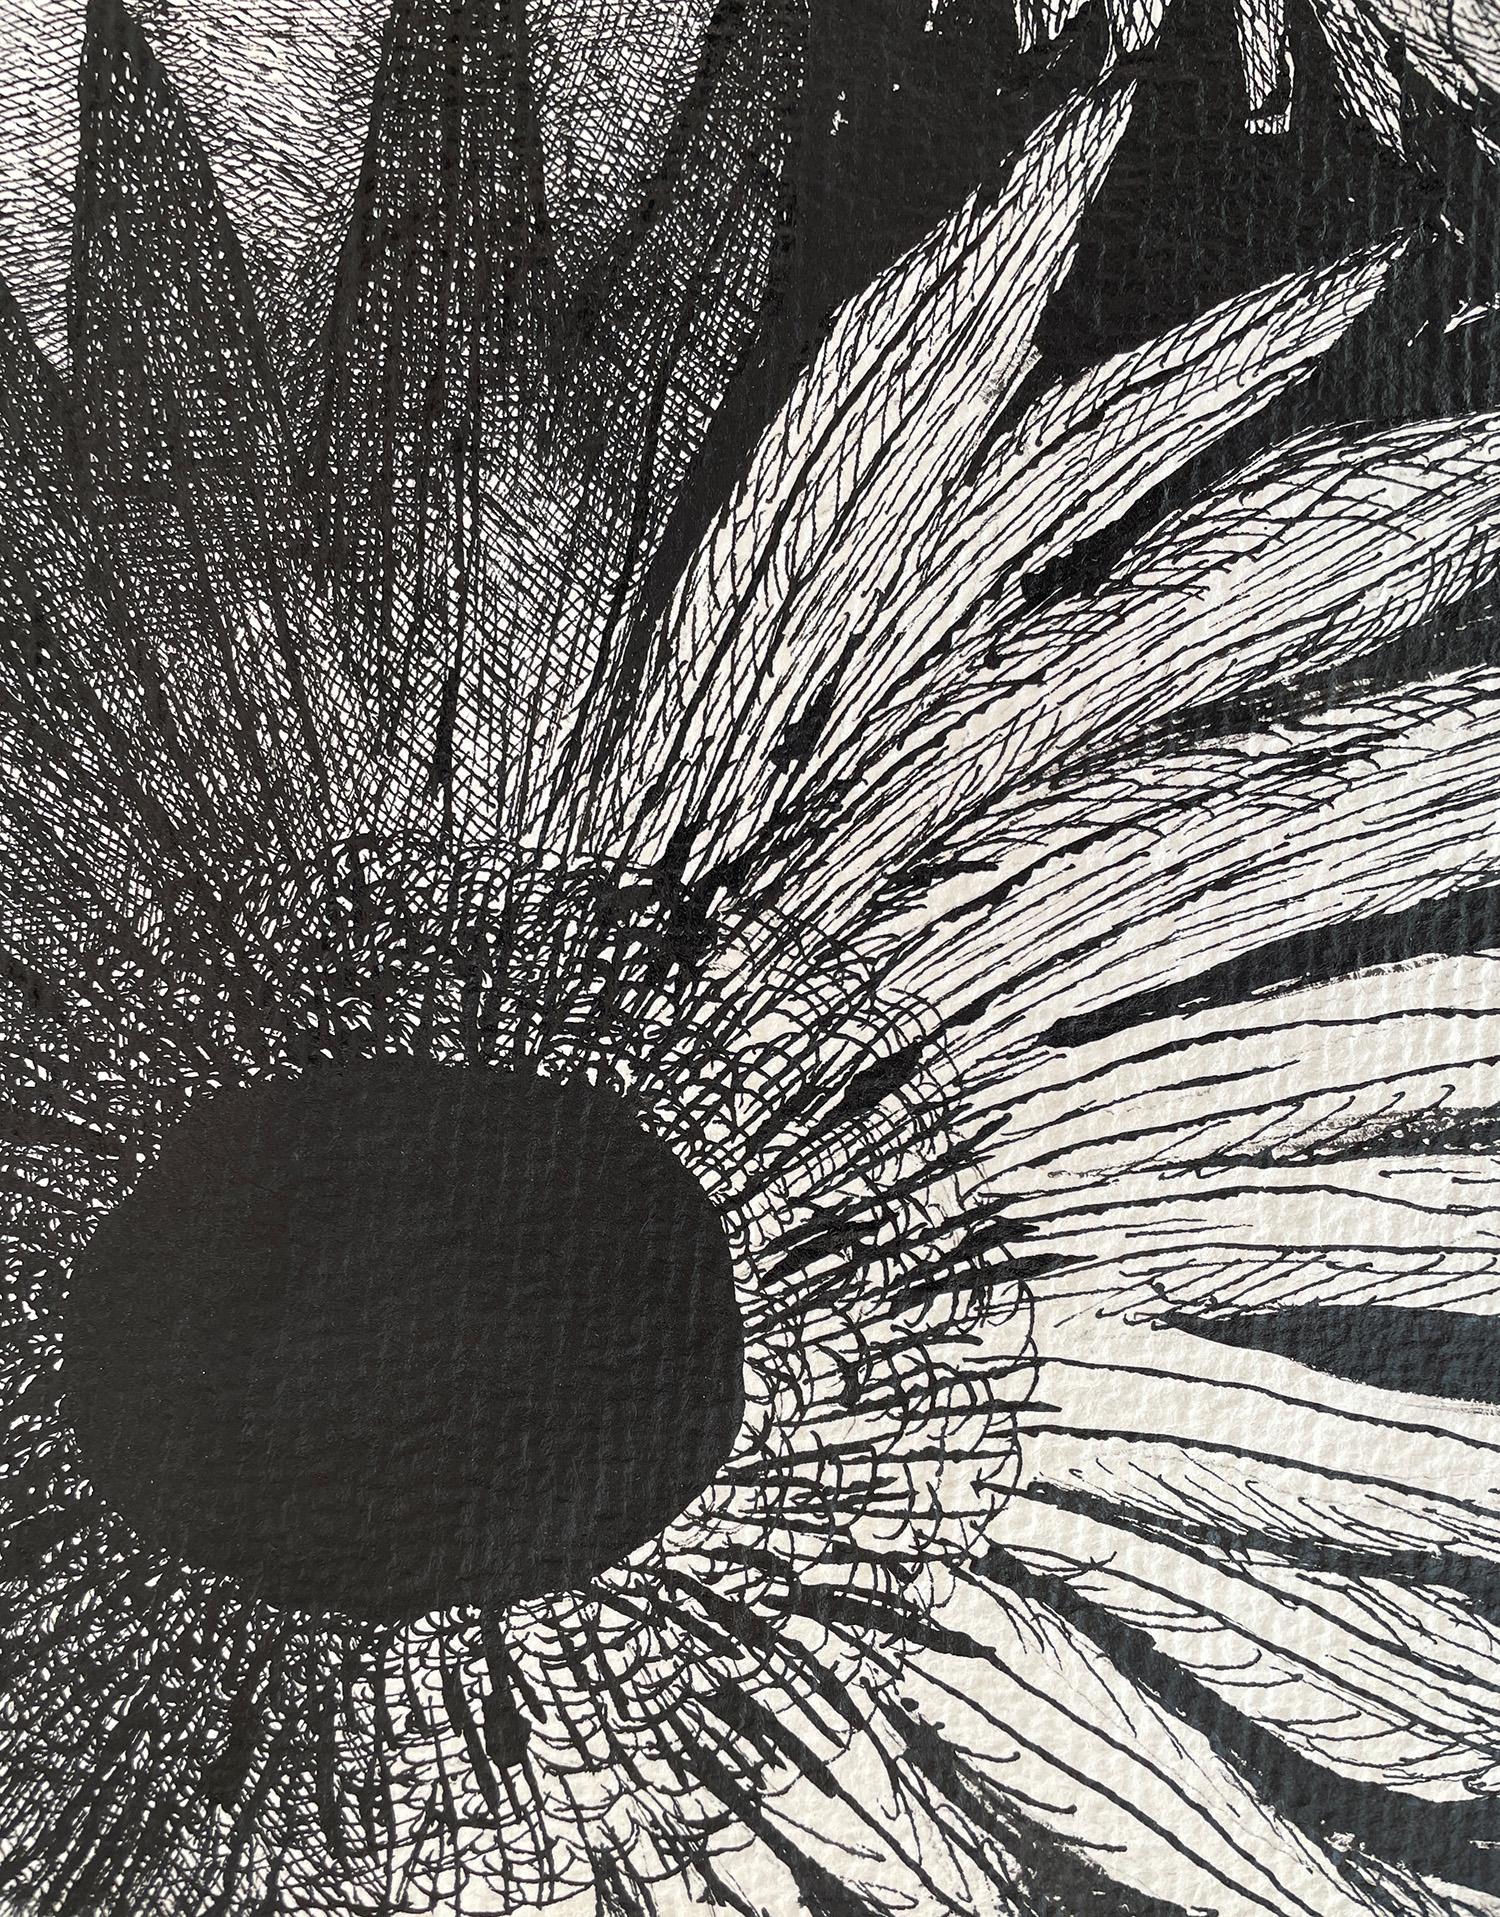 Black eye – Jolanta Johnsson, experienced Polish artist, graduate of the Academy of Fine Arts in Warsaw, PhD of fine arts, university teacher. She currently lives in Sweden. This is how she writes about this drawing:

The Black Eye flower drawing is